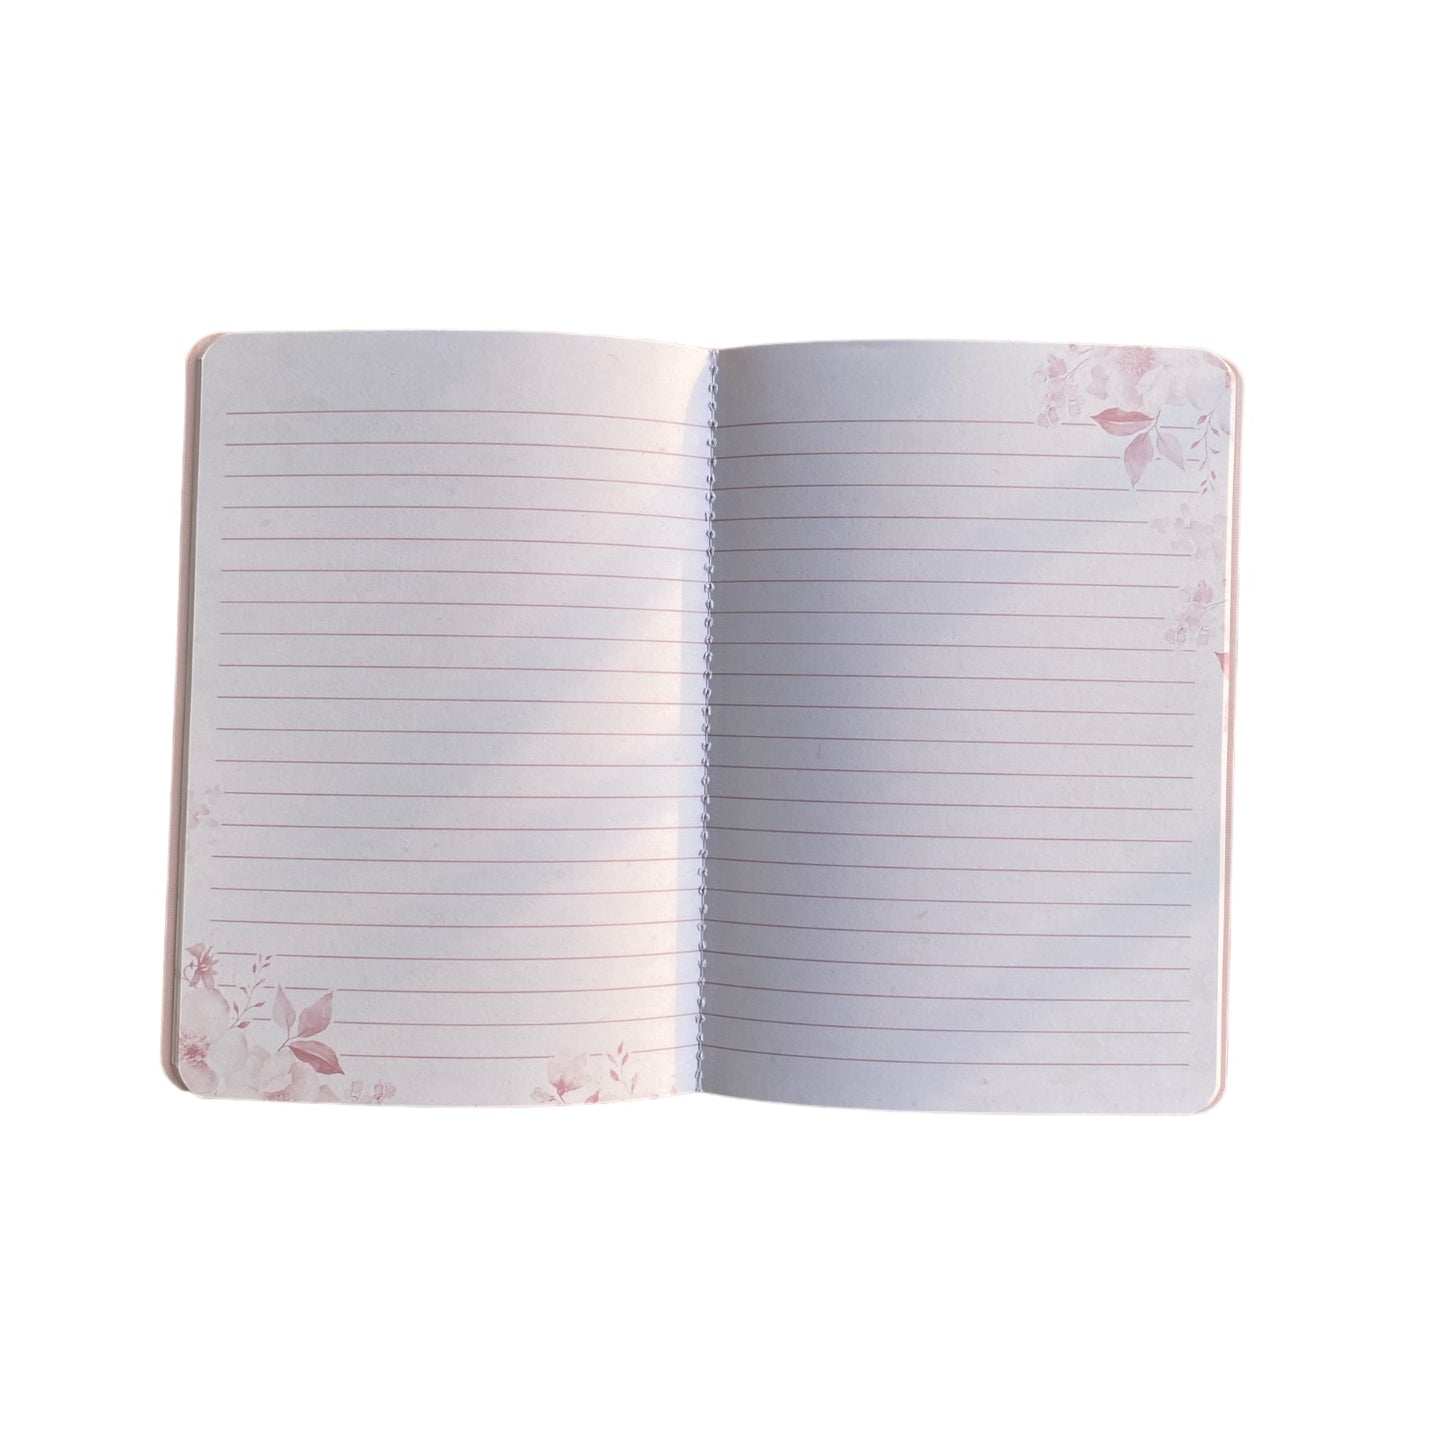 White Floral Trust in the Lord Notebook